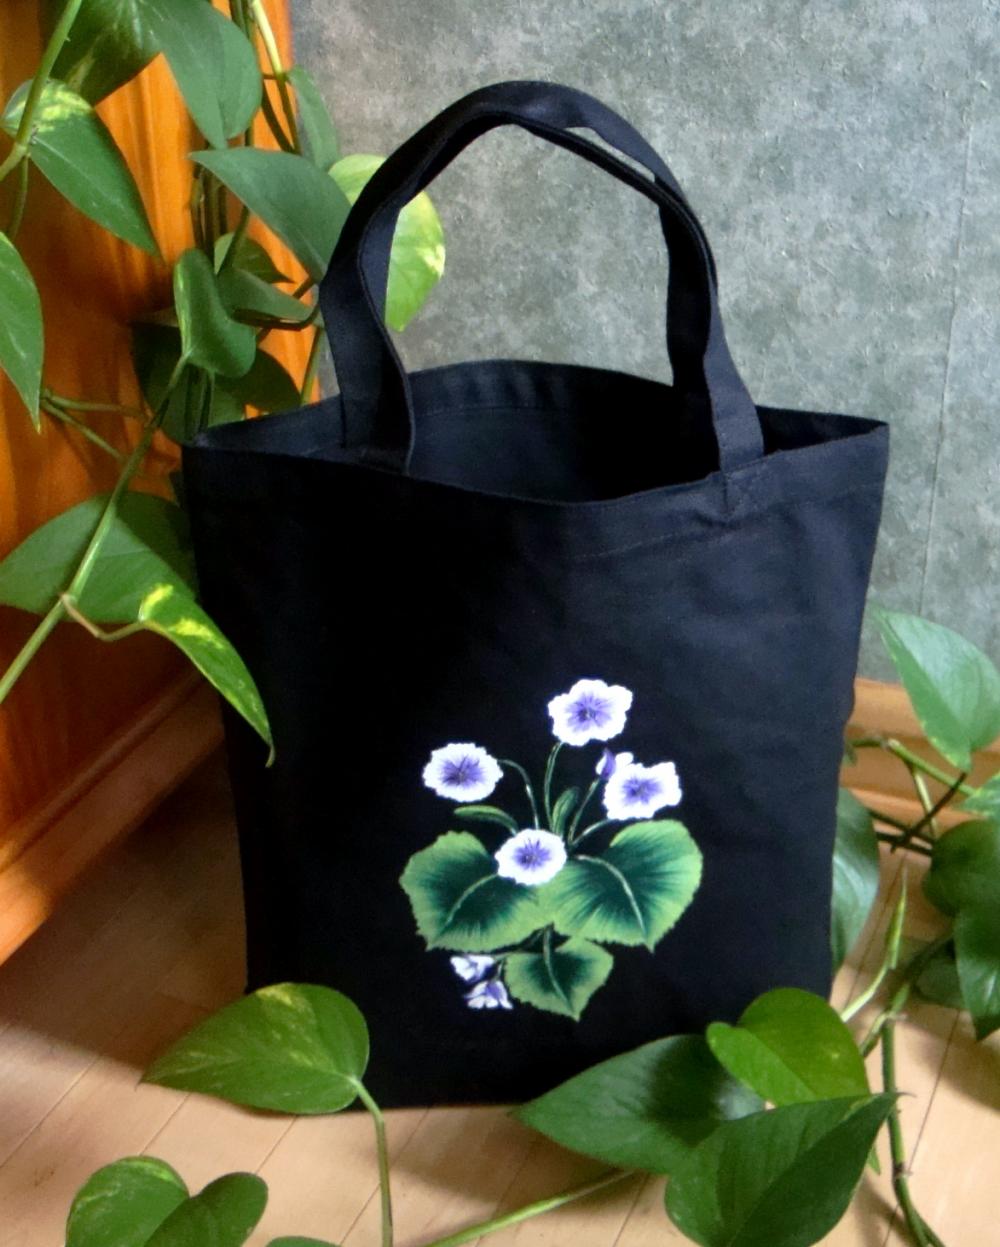 Black Tote Bag With Painted Violets